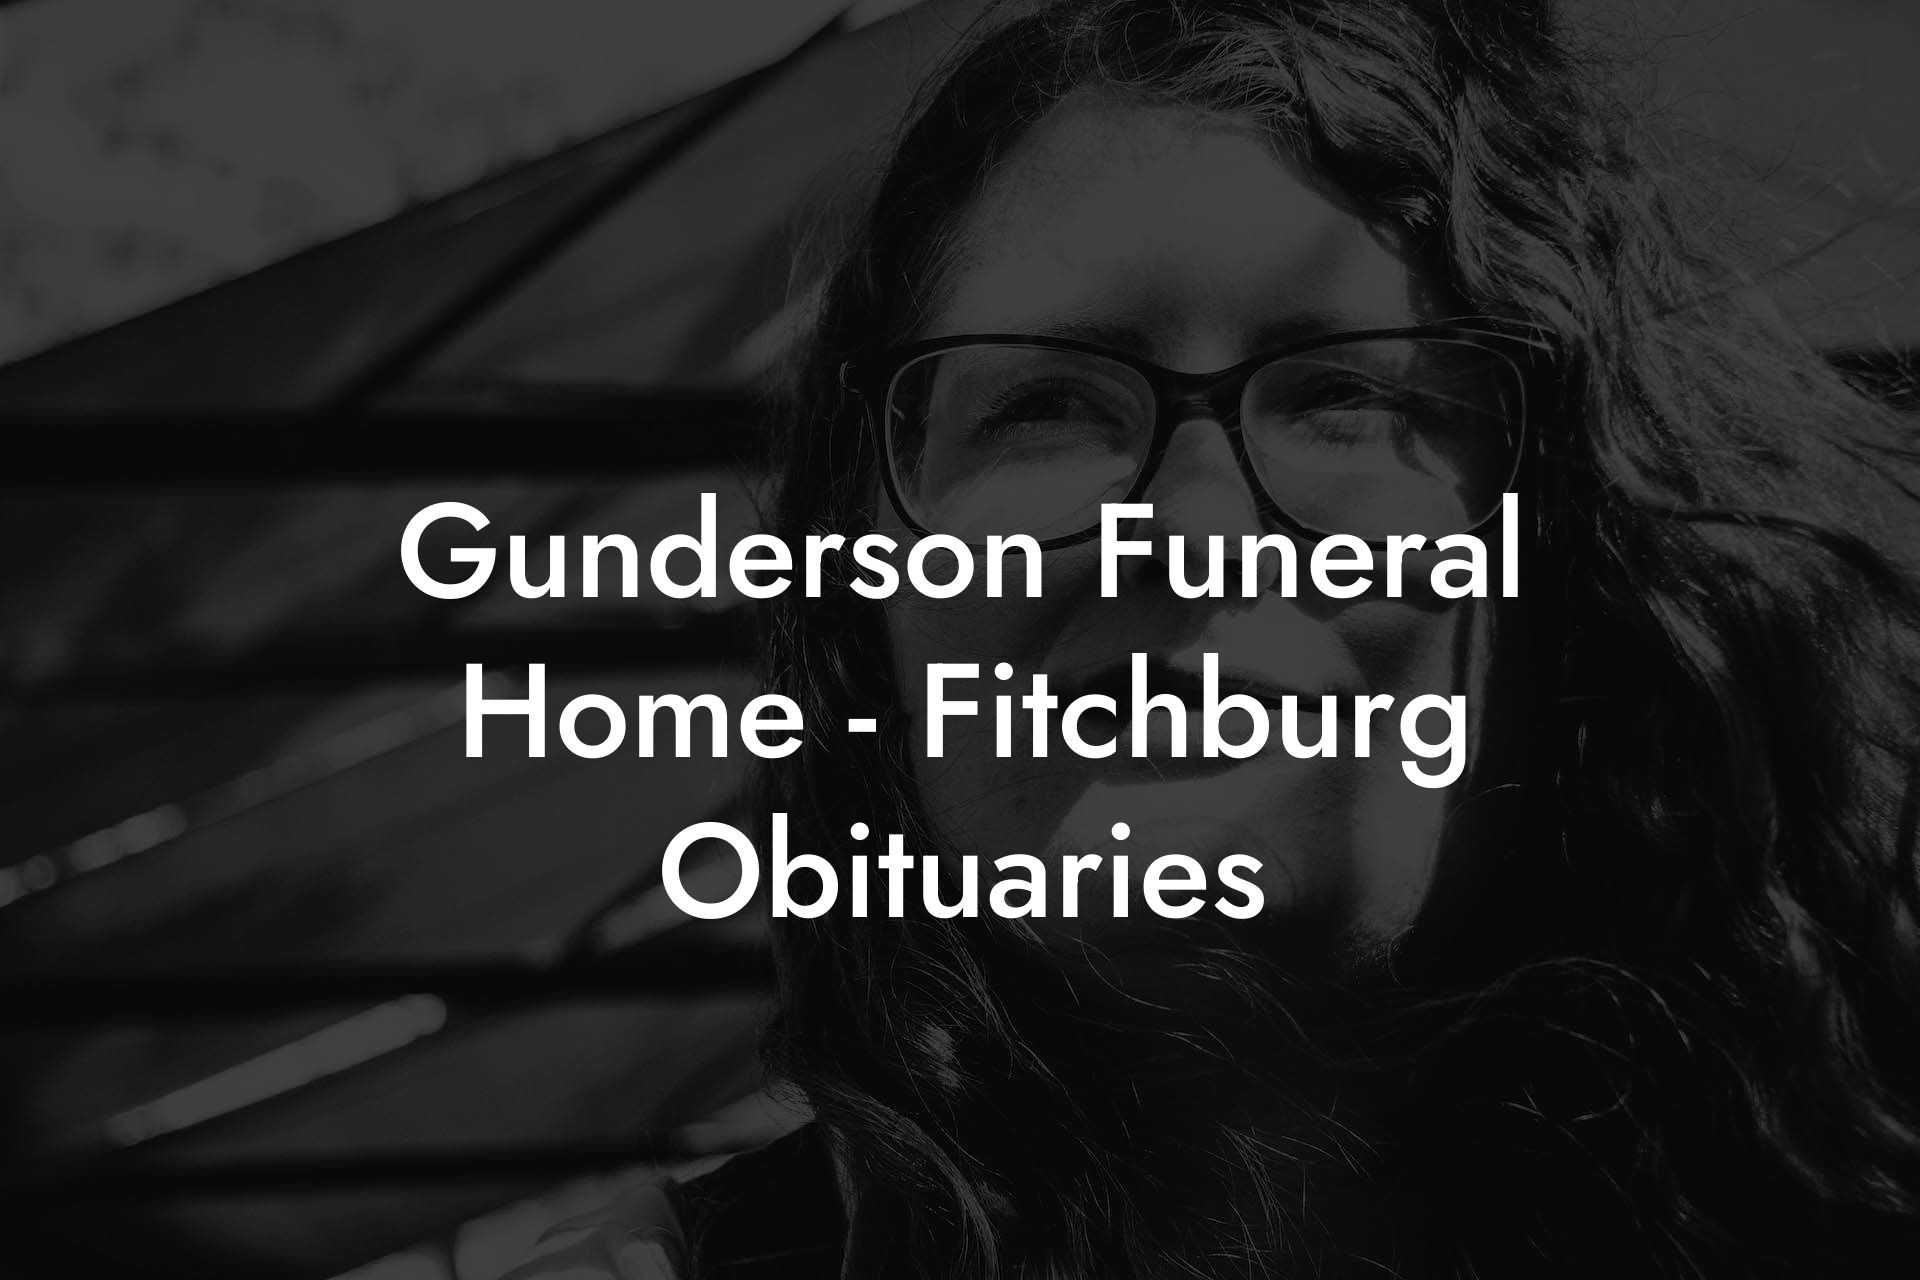 Gunderson Funeral Home - Fitchburg Obituaries